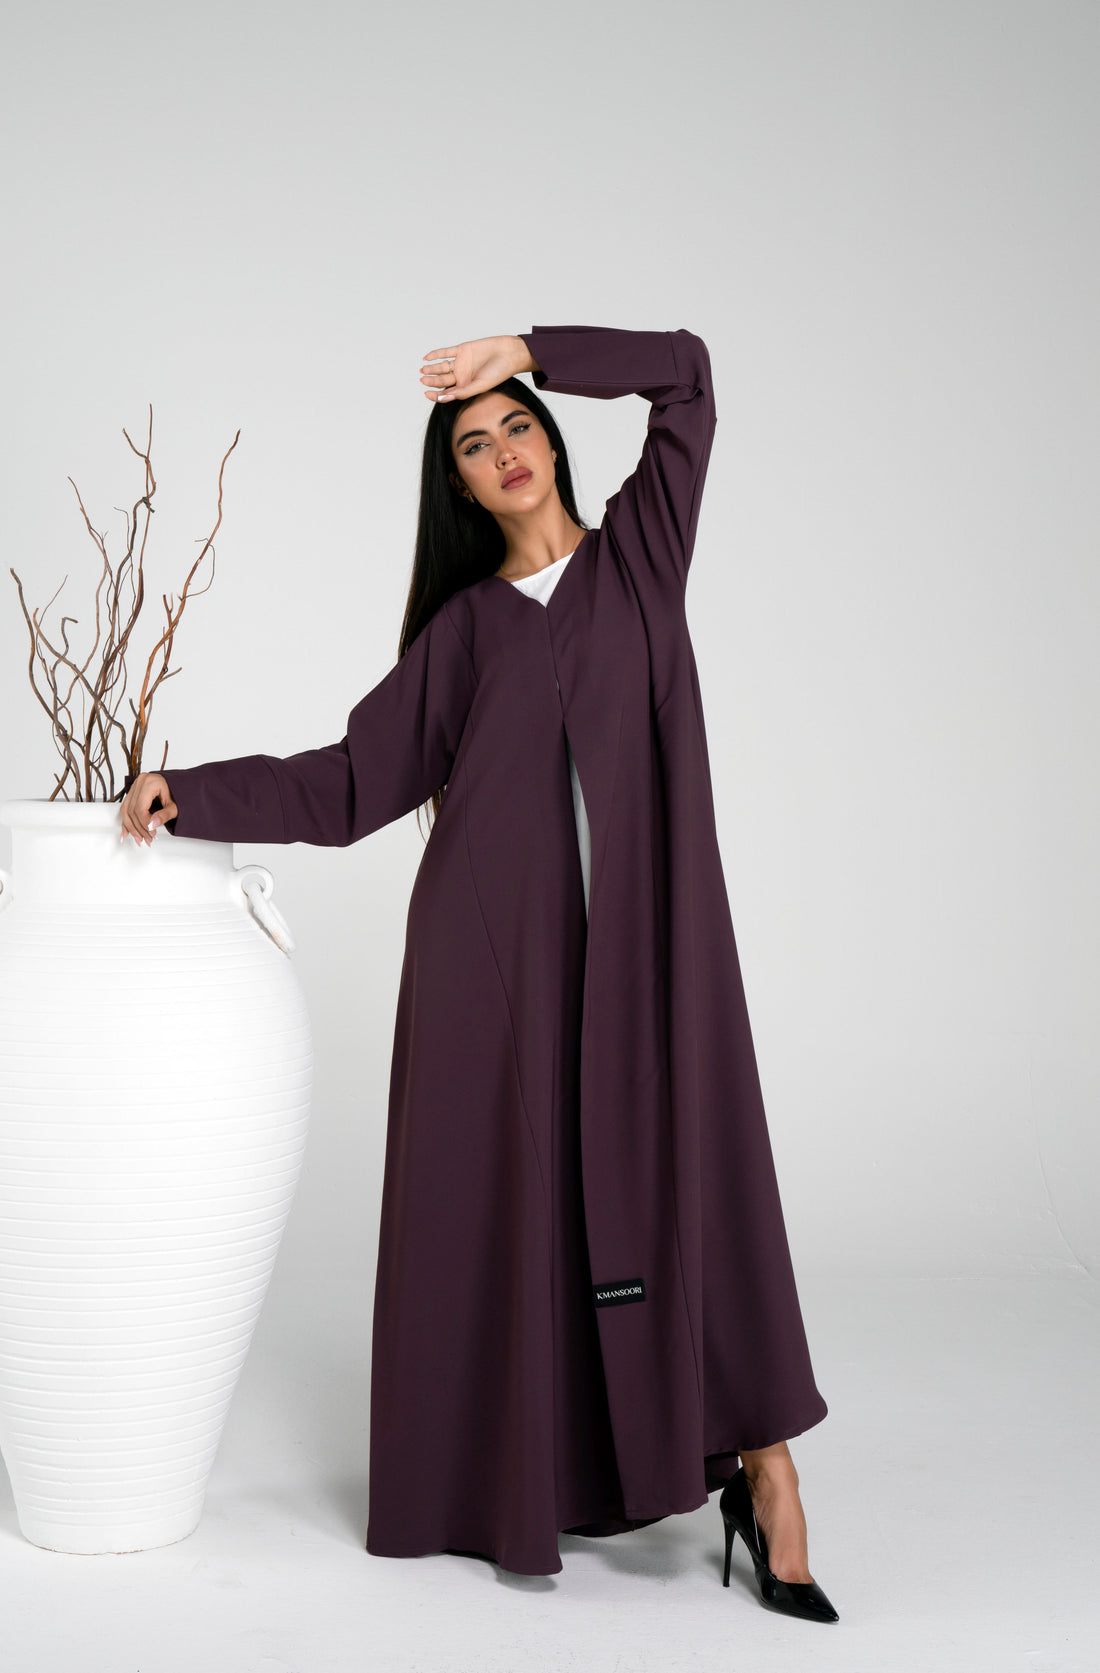 Explore Our Fashionable Travel Abaya Collection